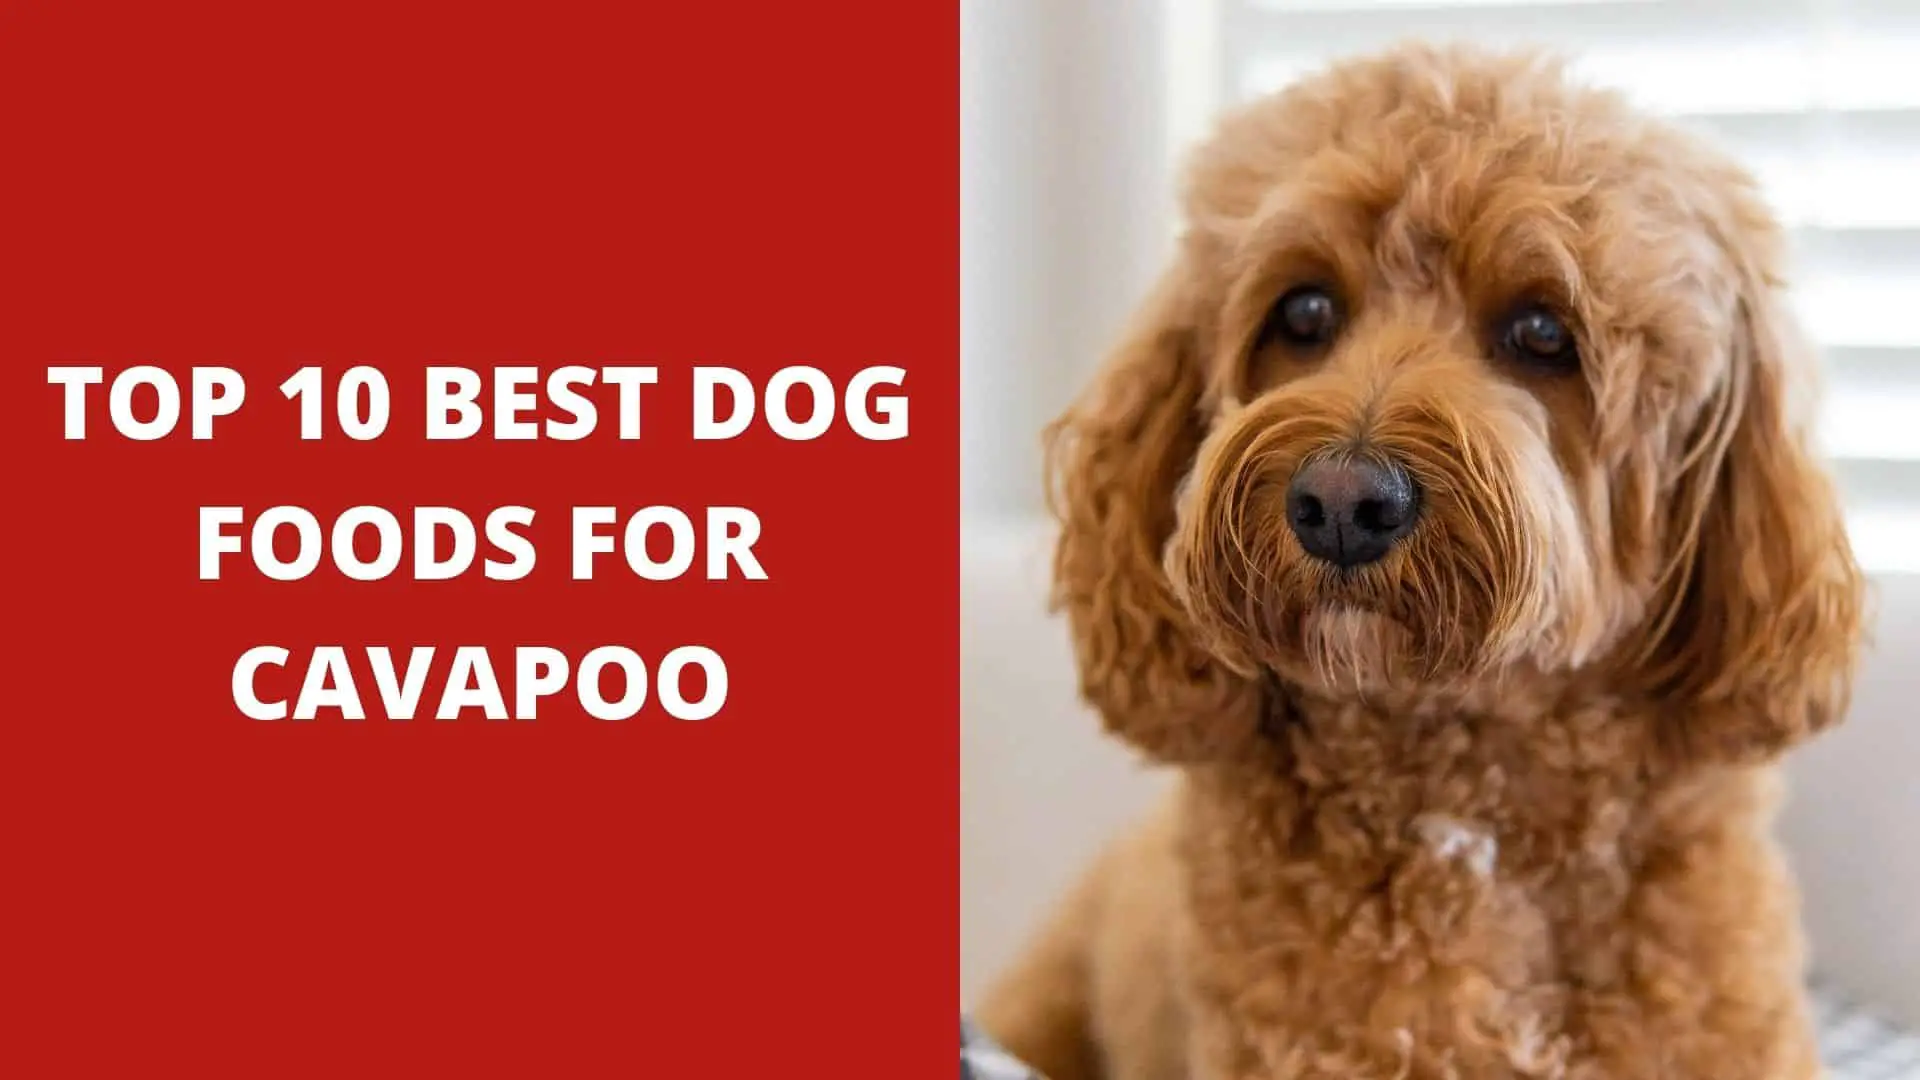 Top 10 Best Dog Foods for Cavapoo [ 2022 Reviews ]